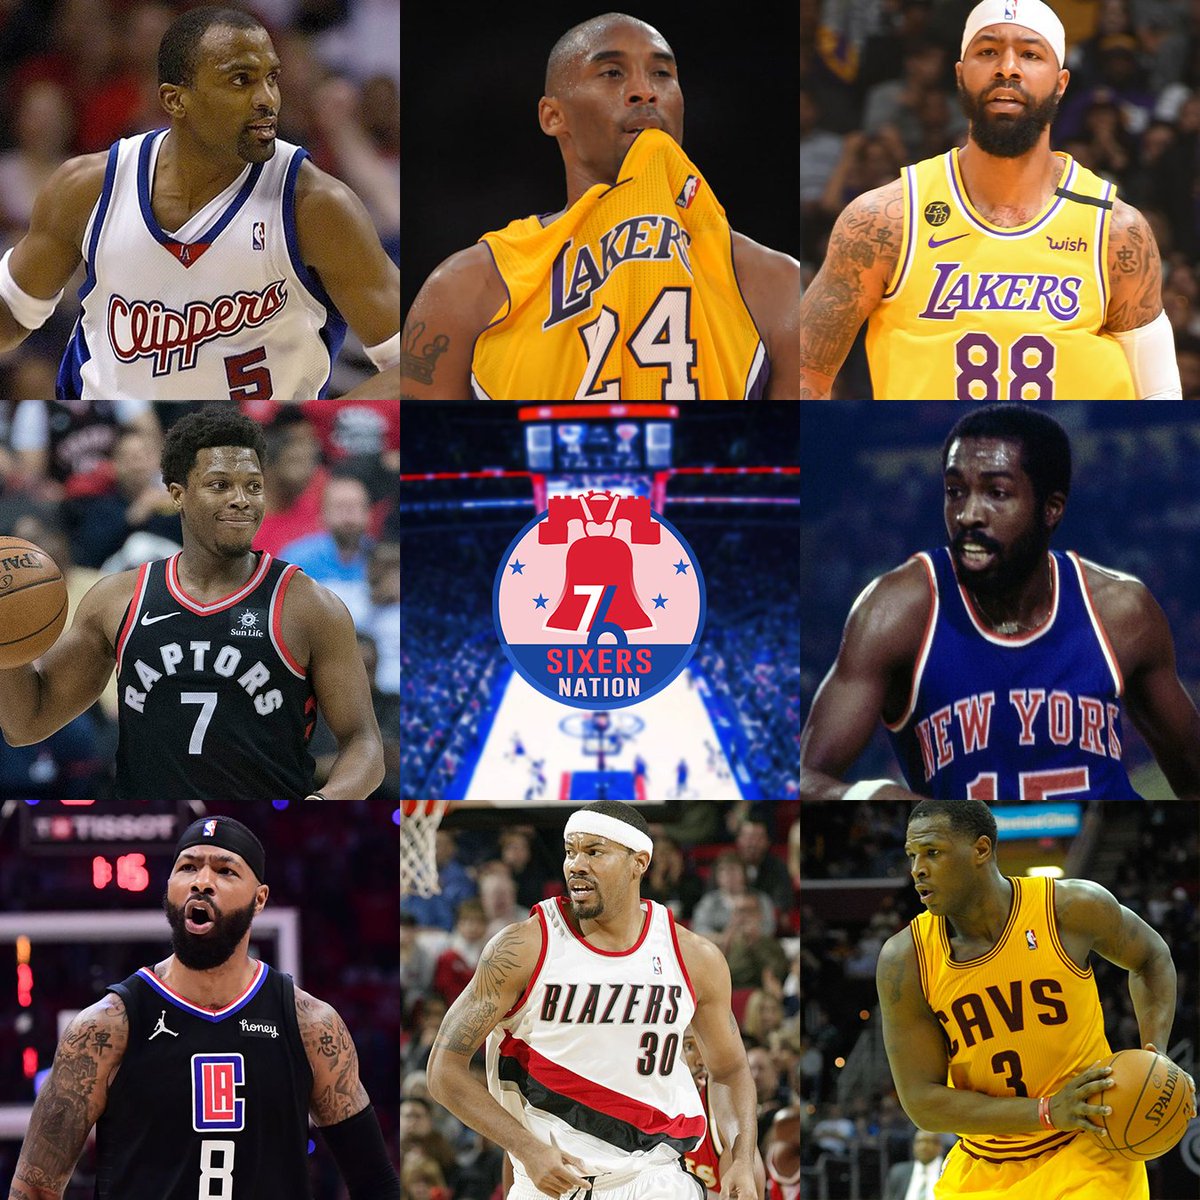 RT @SixersNationCP: Which Philadelphian did you wish would've played for the Sixers? https://t.co/IGa545PAsc